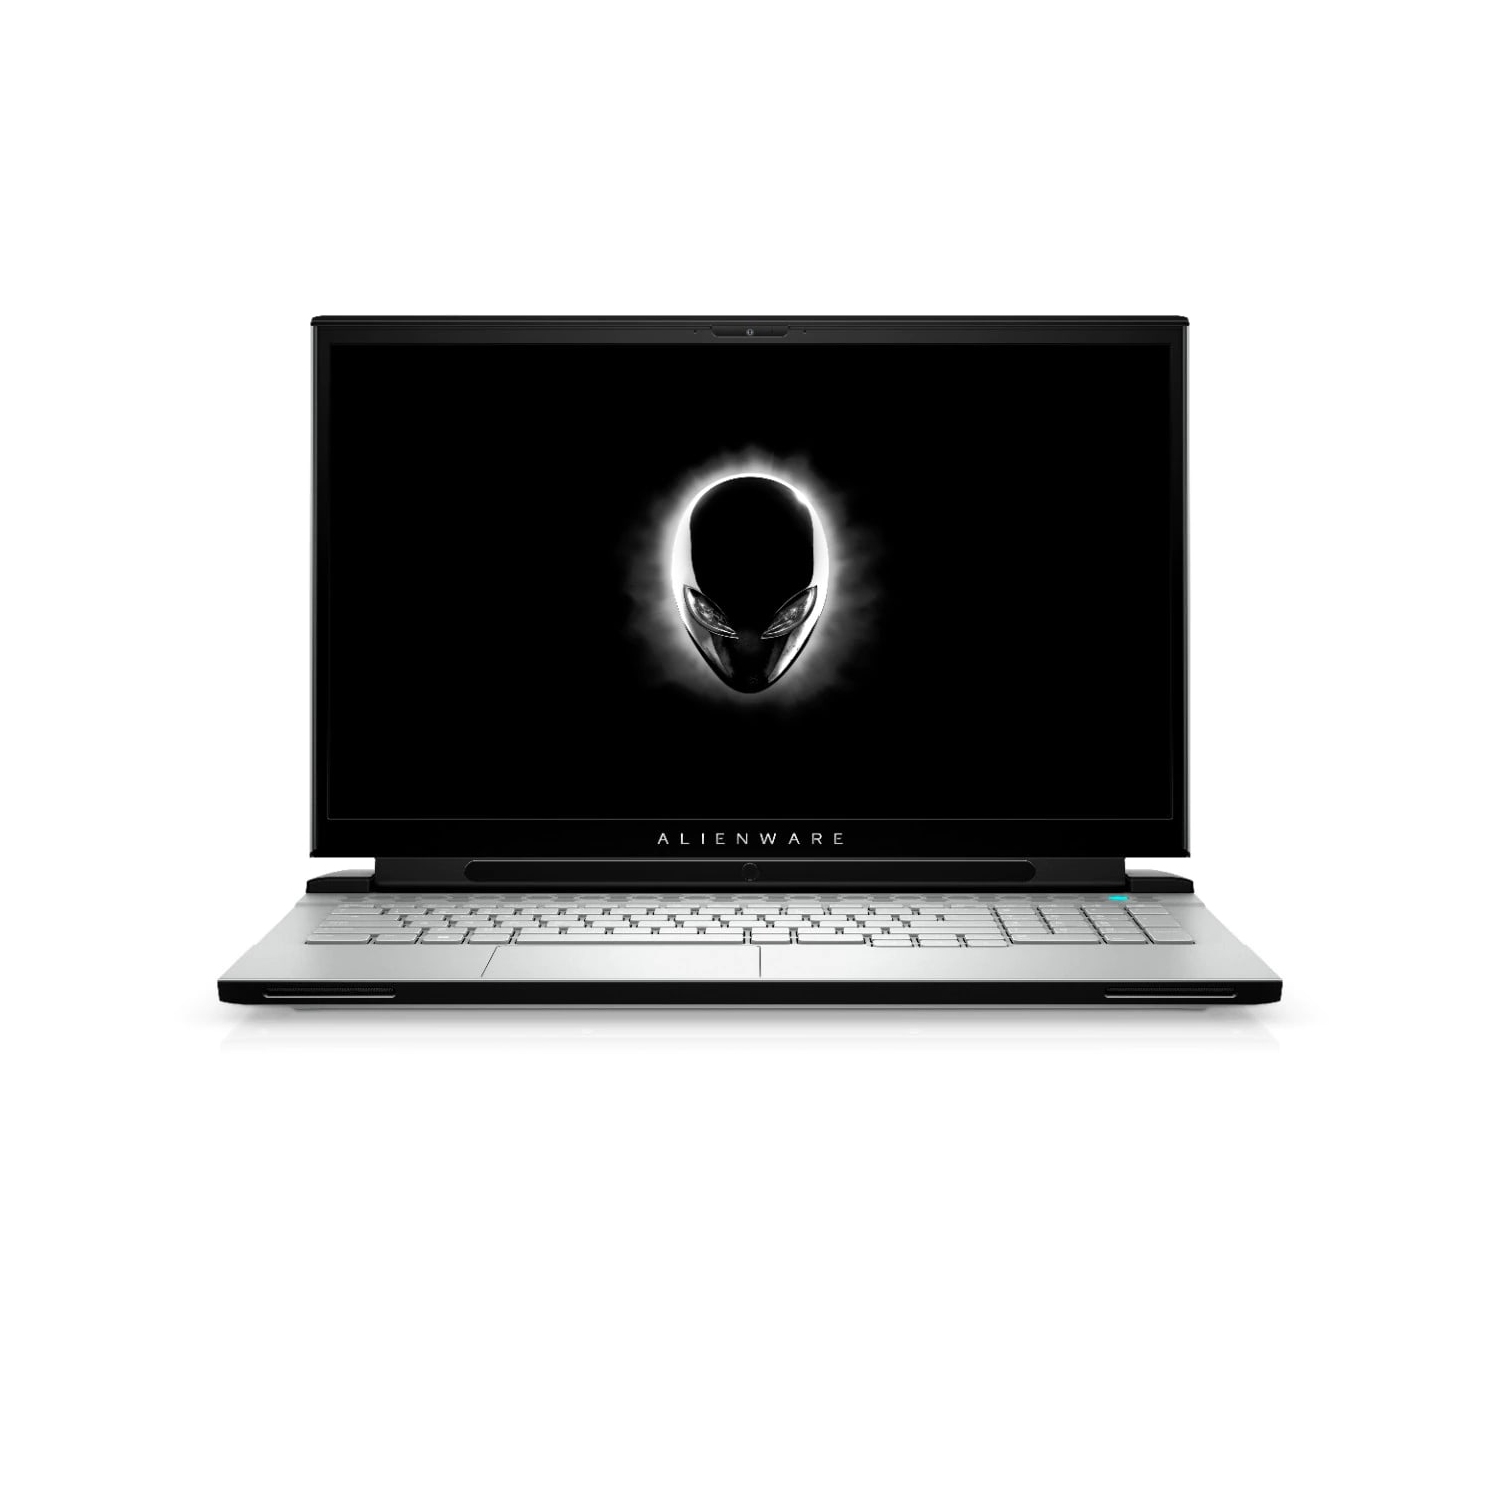 Refurbished (Excellent) - Dell Alienware m17 R3 Gaming Laptop (2020), 17.3" FHD, Core i7, 512GB SSD, 16GB RAM, RTX 2070, 6 Cores @ 5 GHz, 10th Gen CPU Certified